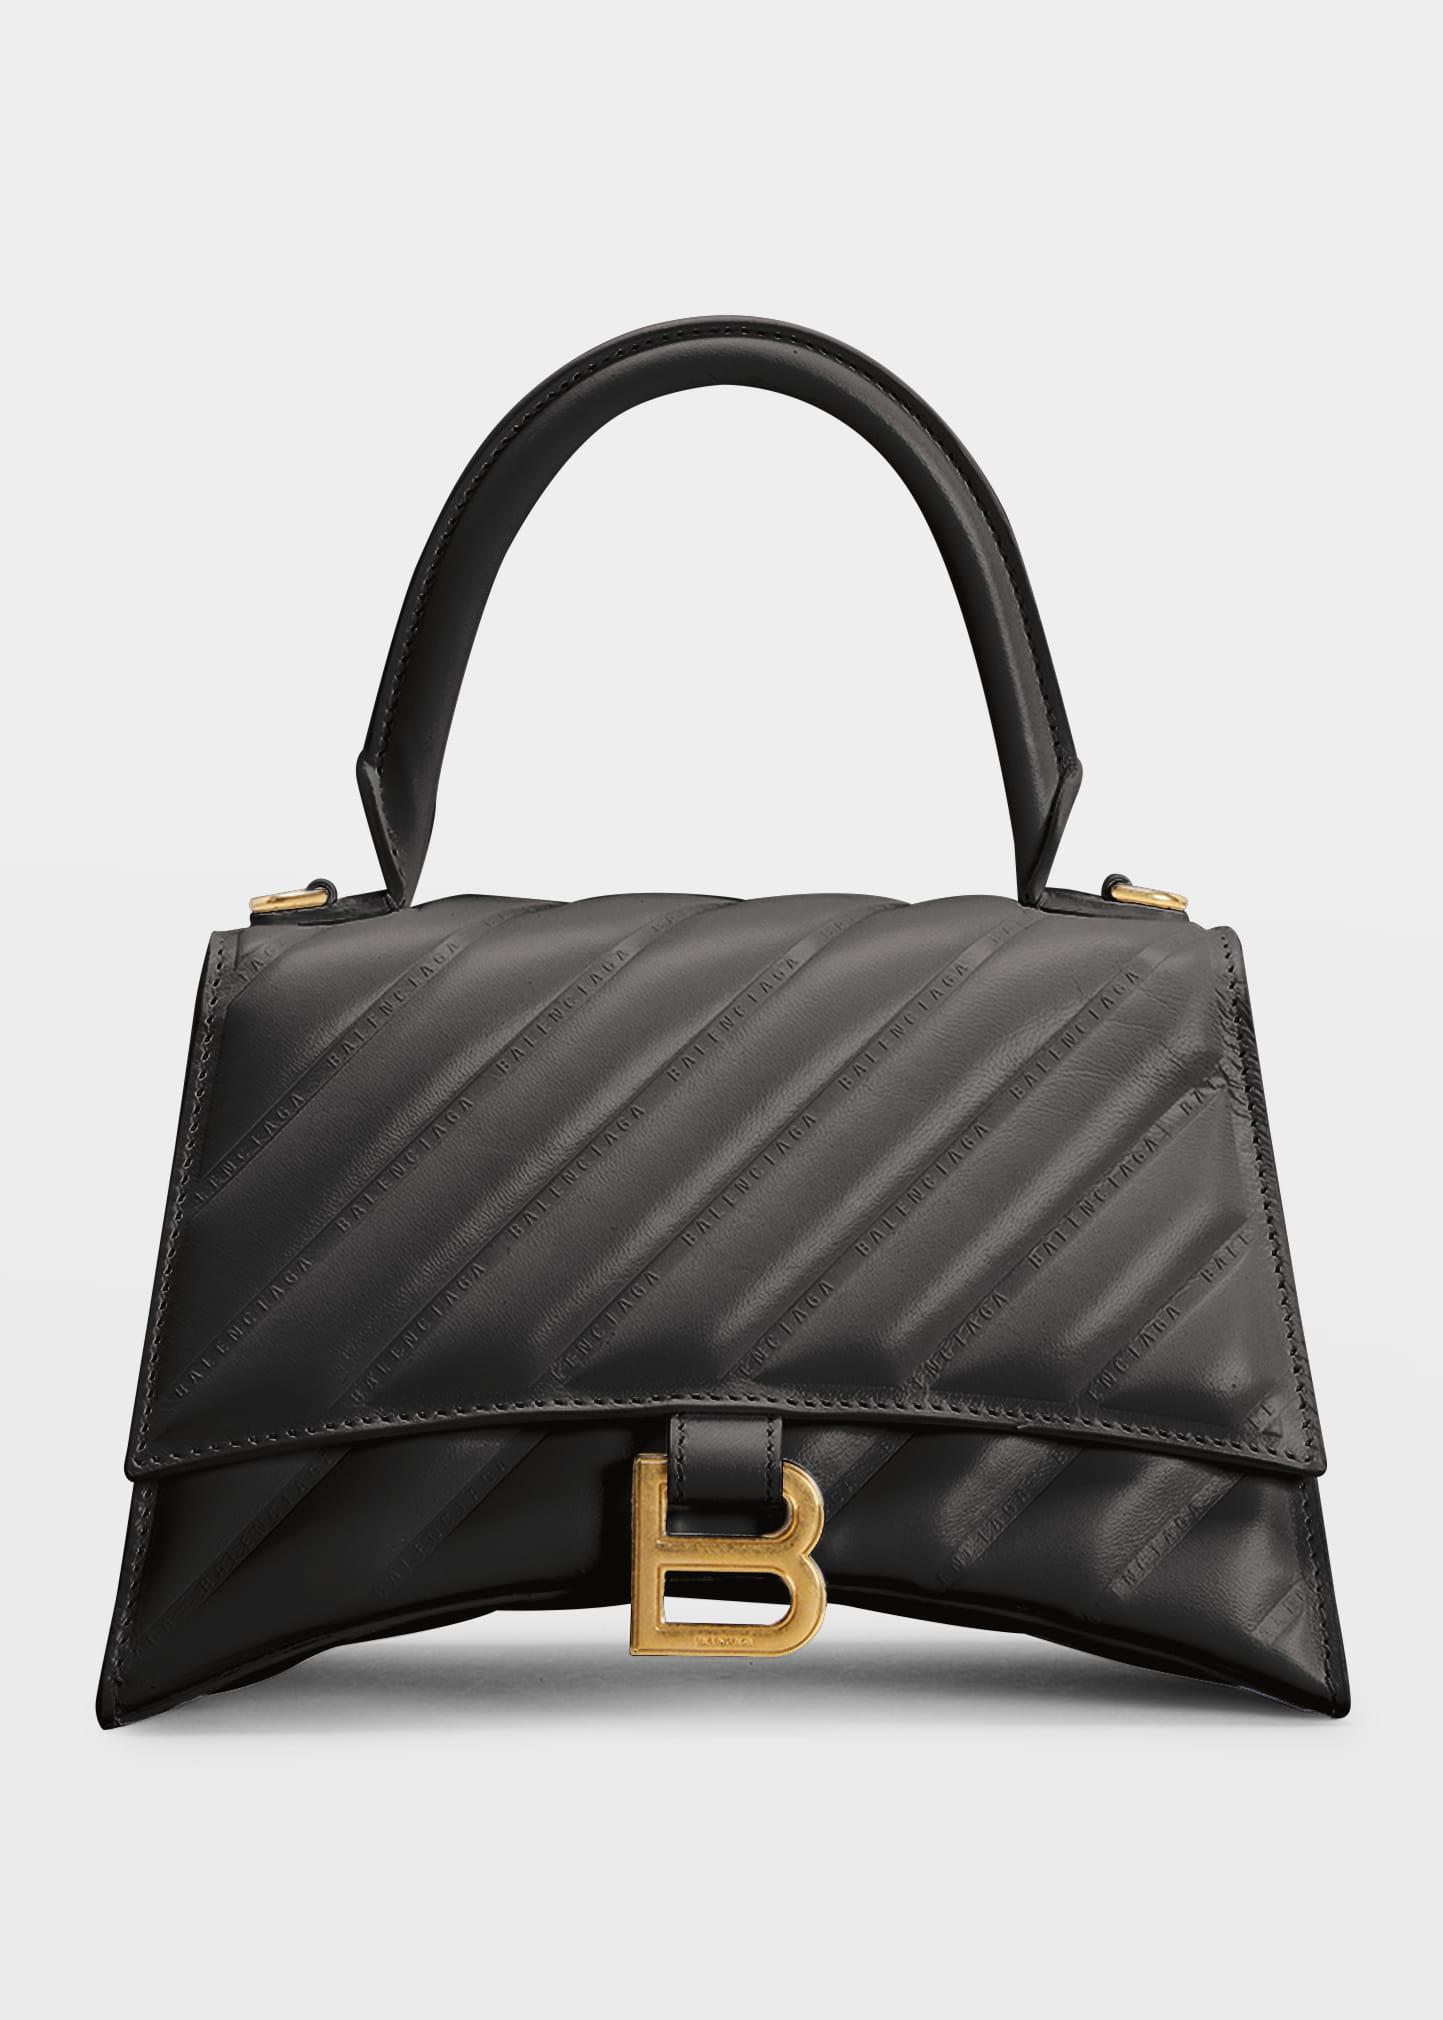 Balenciaga Hourglass Diagonal Quilted Top-handle Bag in Black | Lyst